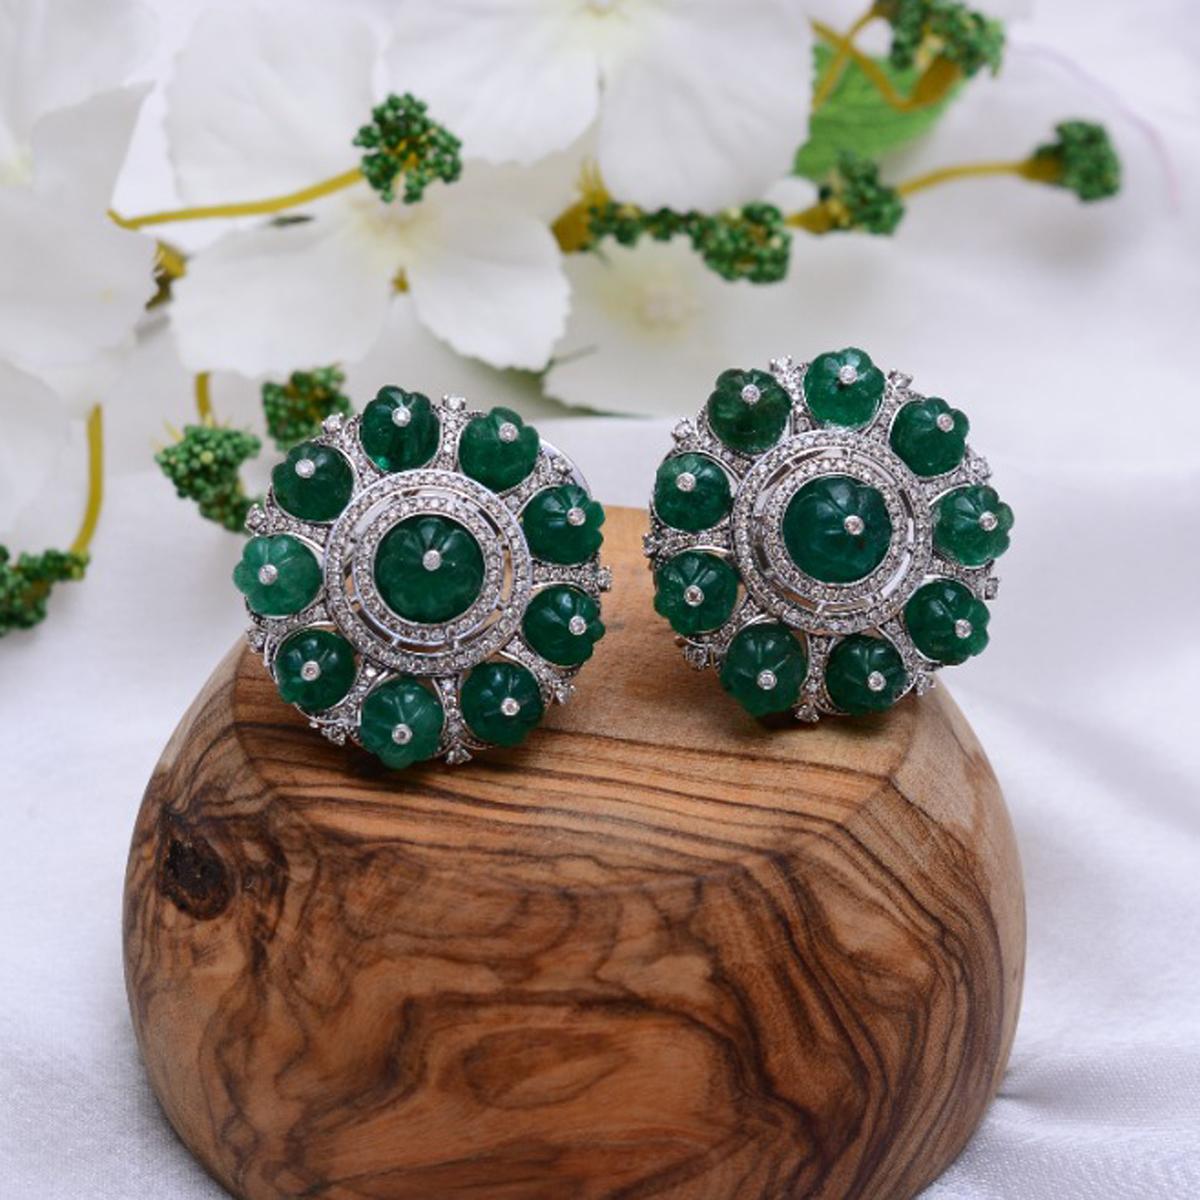 Brilliant Cut Emerald Stud Earrings with Diamond in 14k Gold For Sale